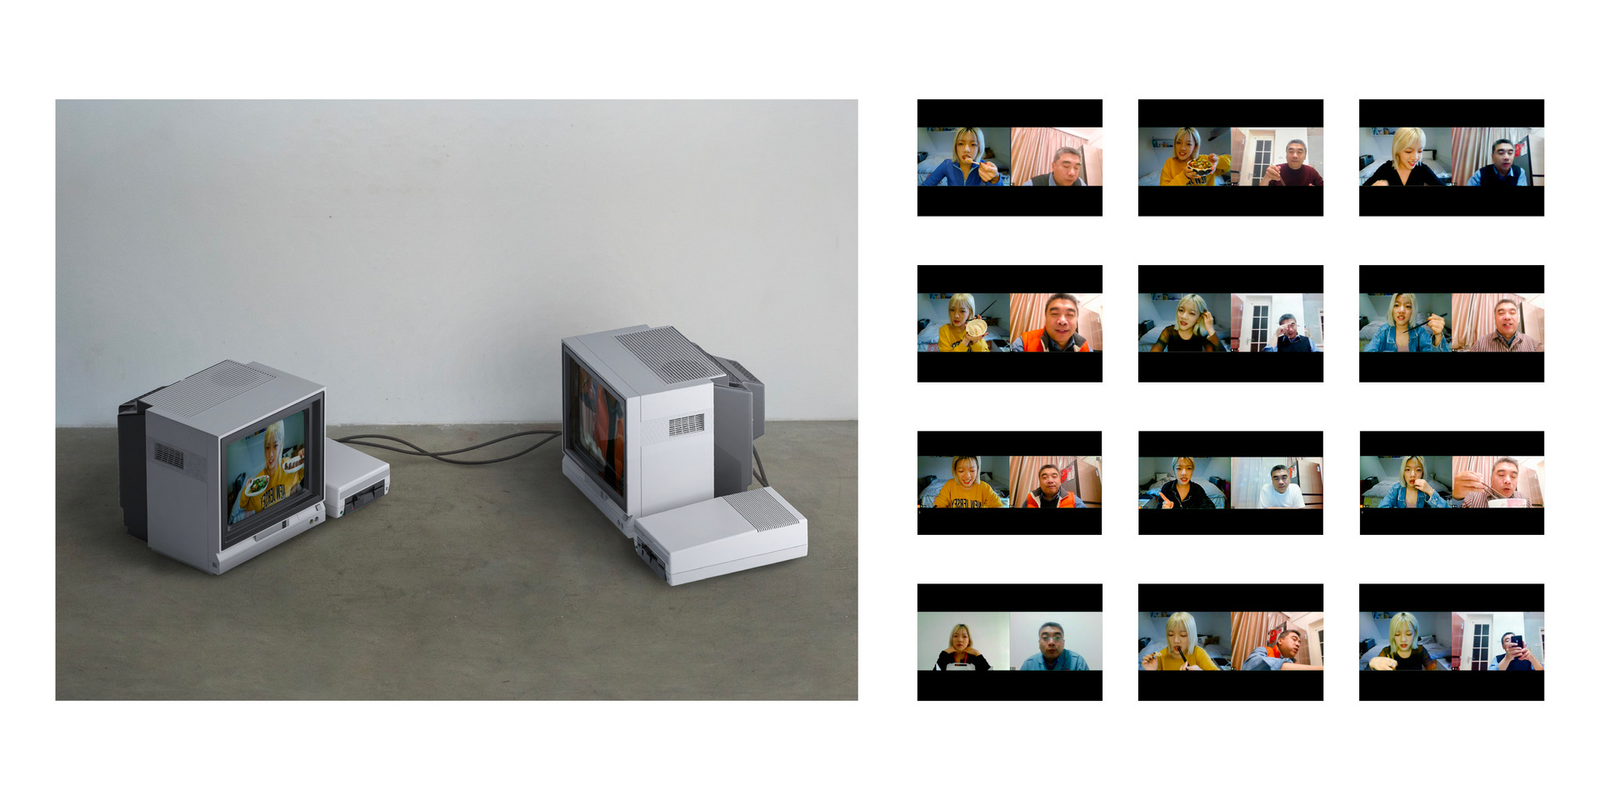 Interstice is an ongoing and year-long video project about having dinner with father. 